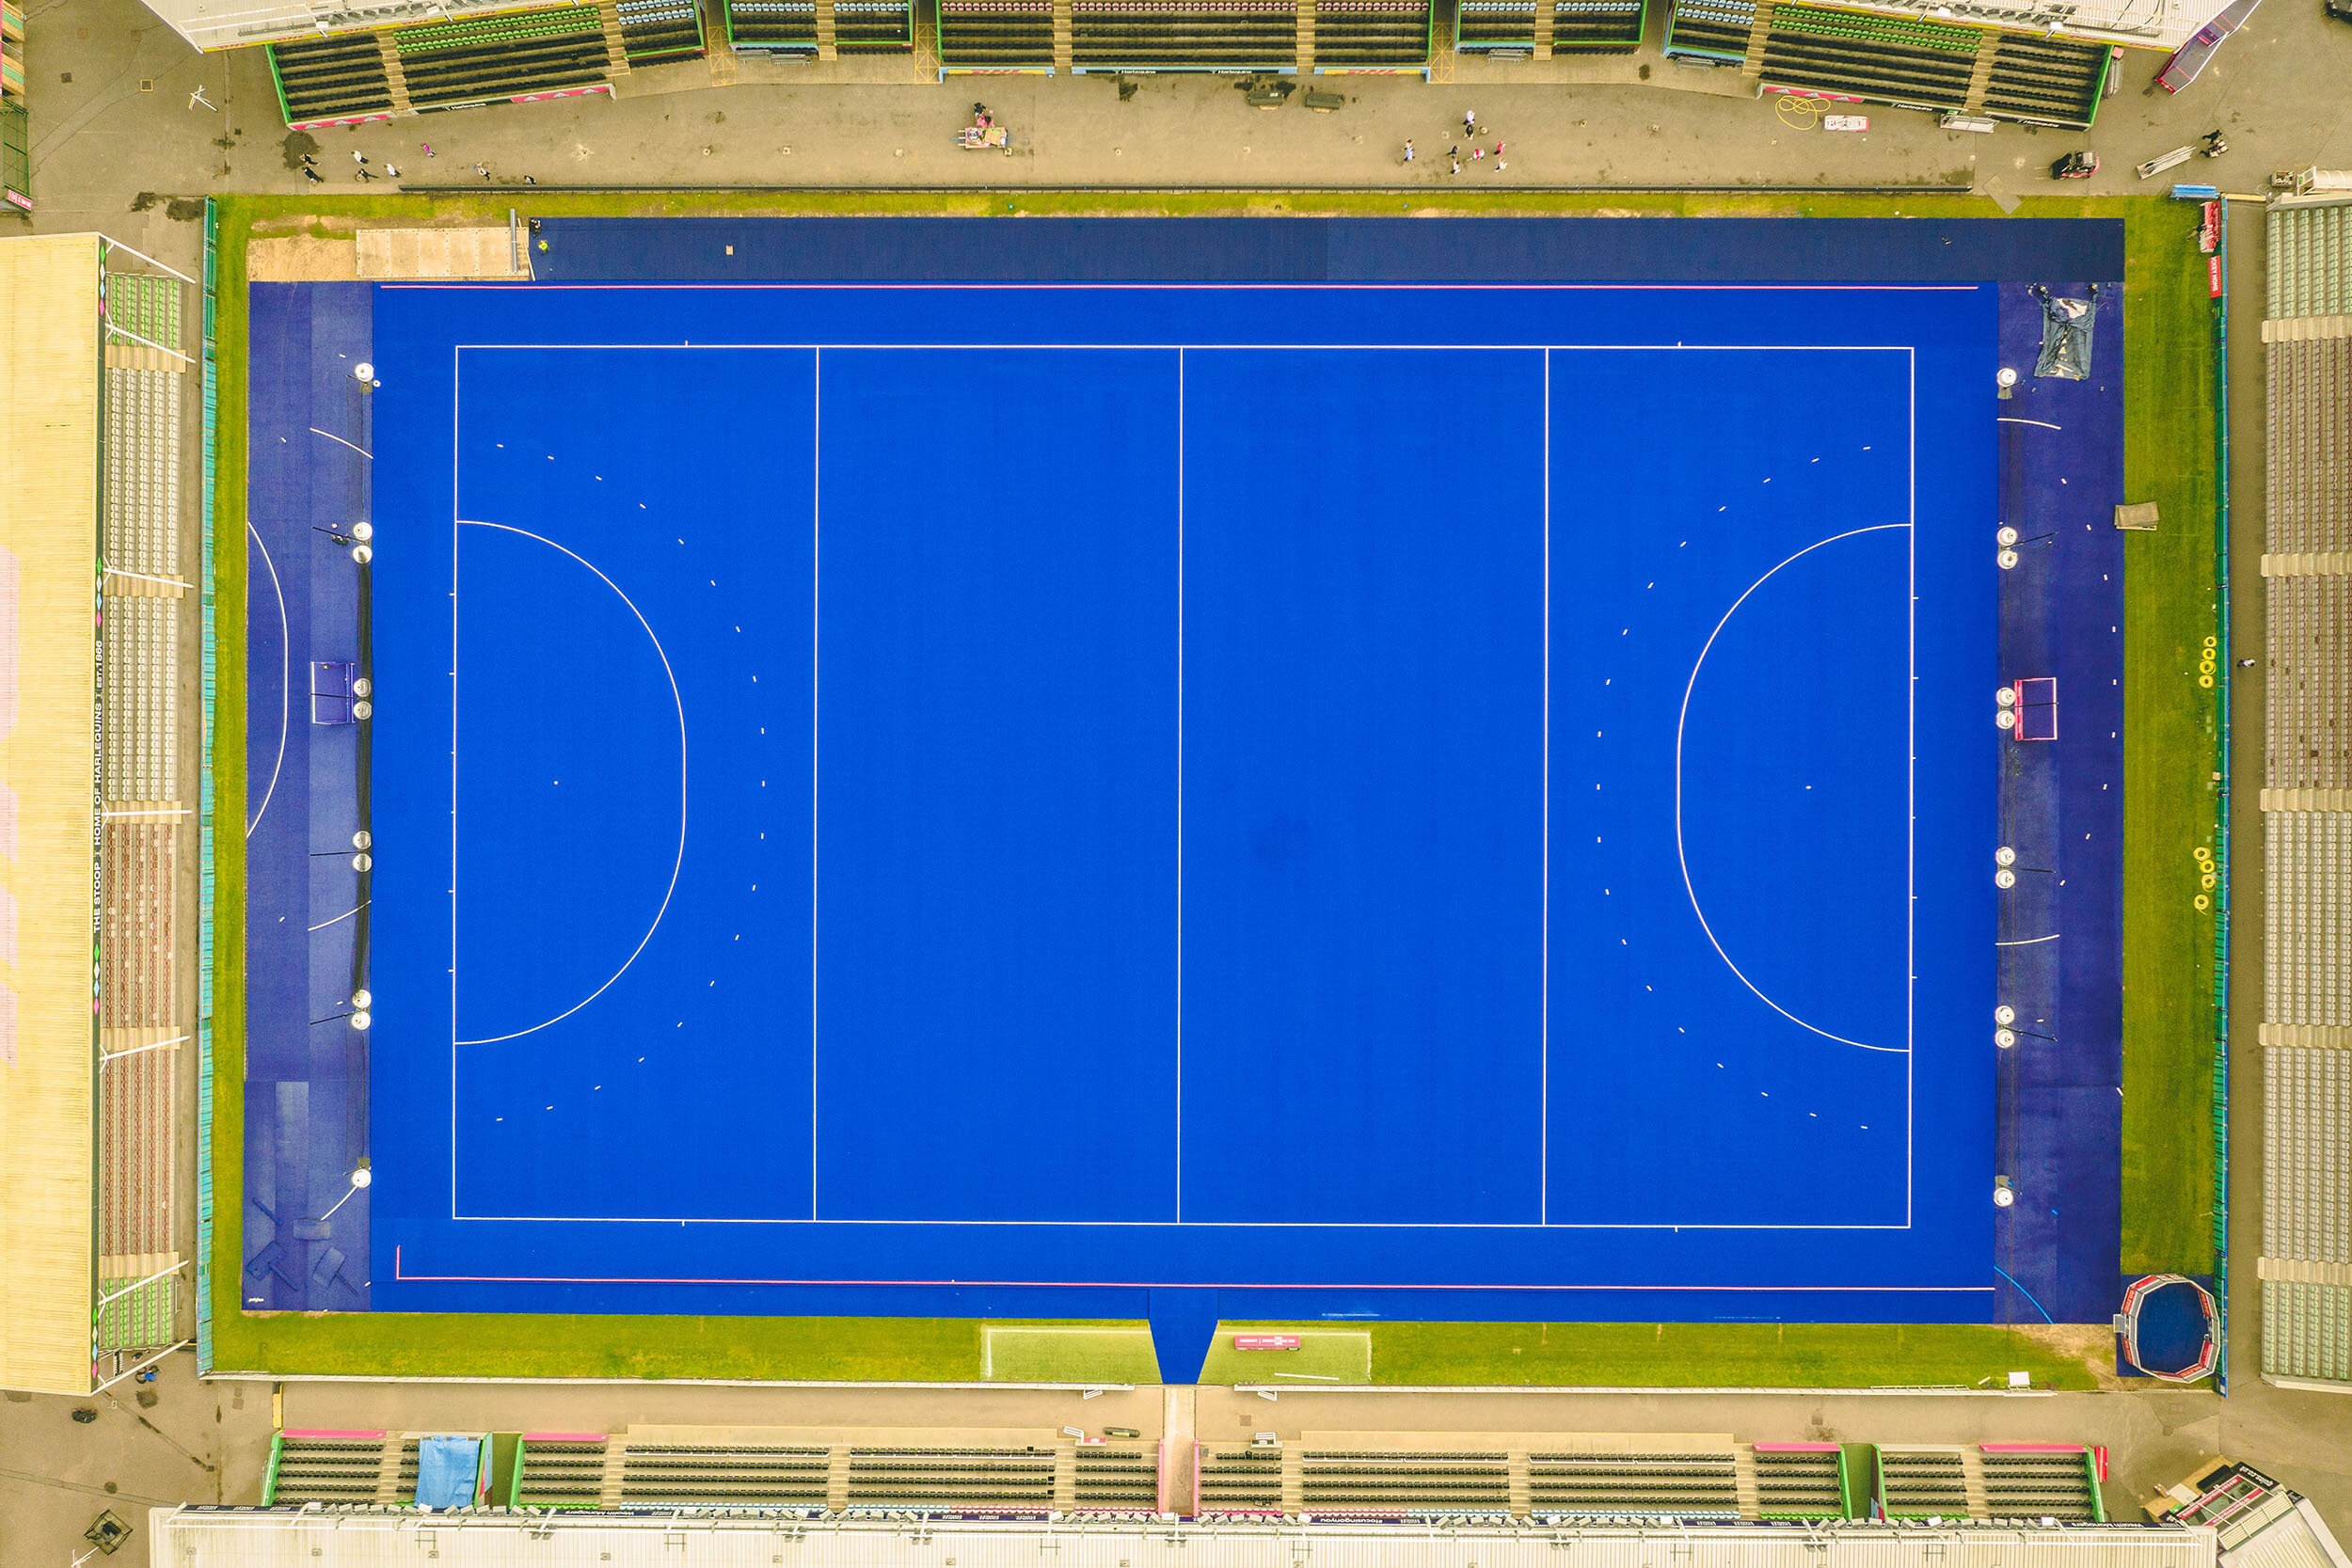 Arial view of a temporary hockey pitch surface at The Stoop